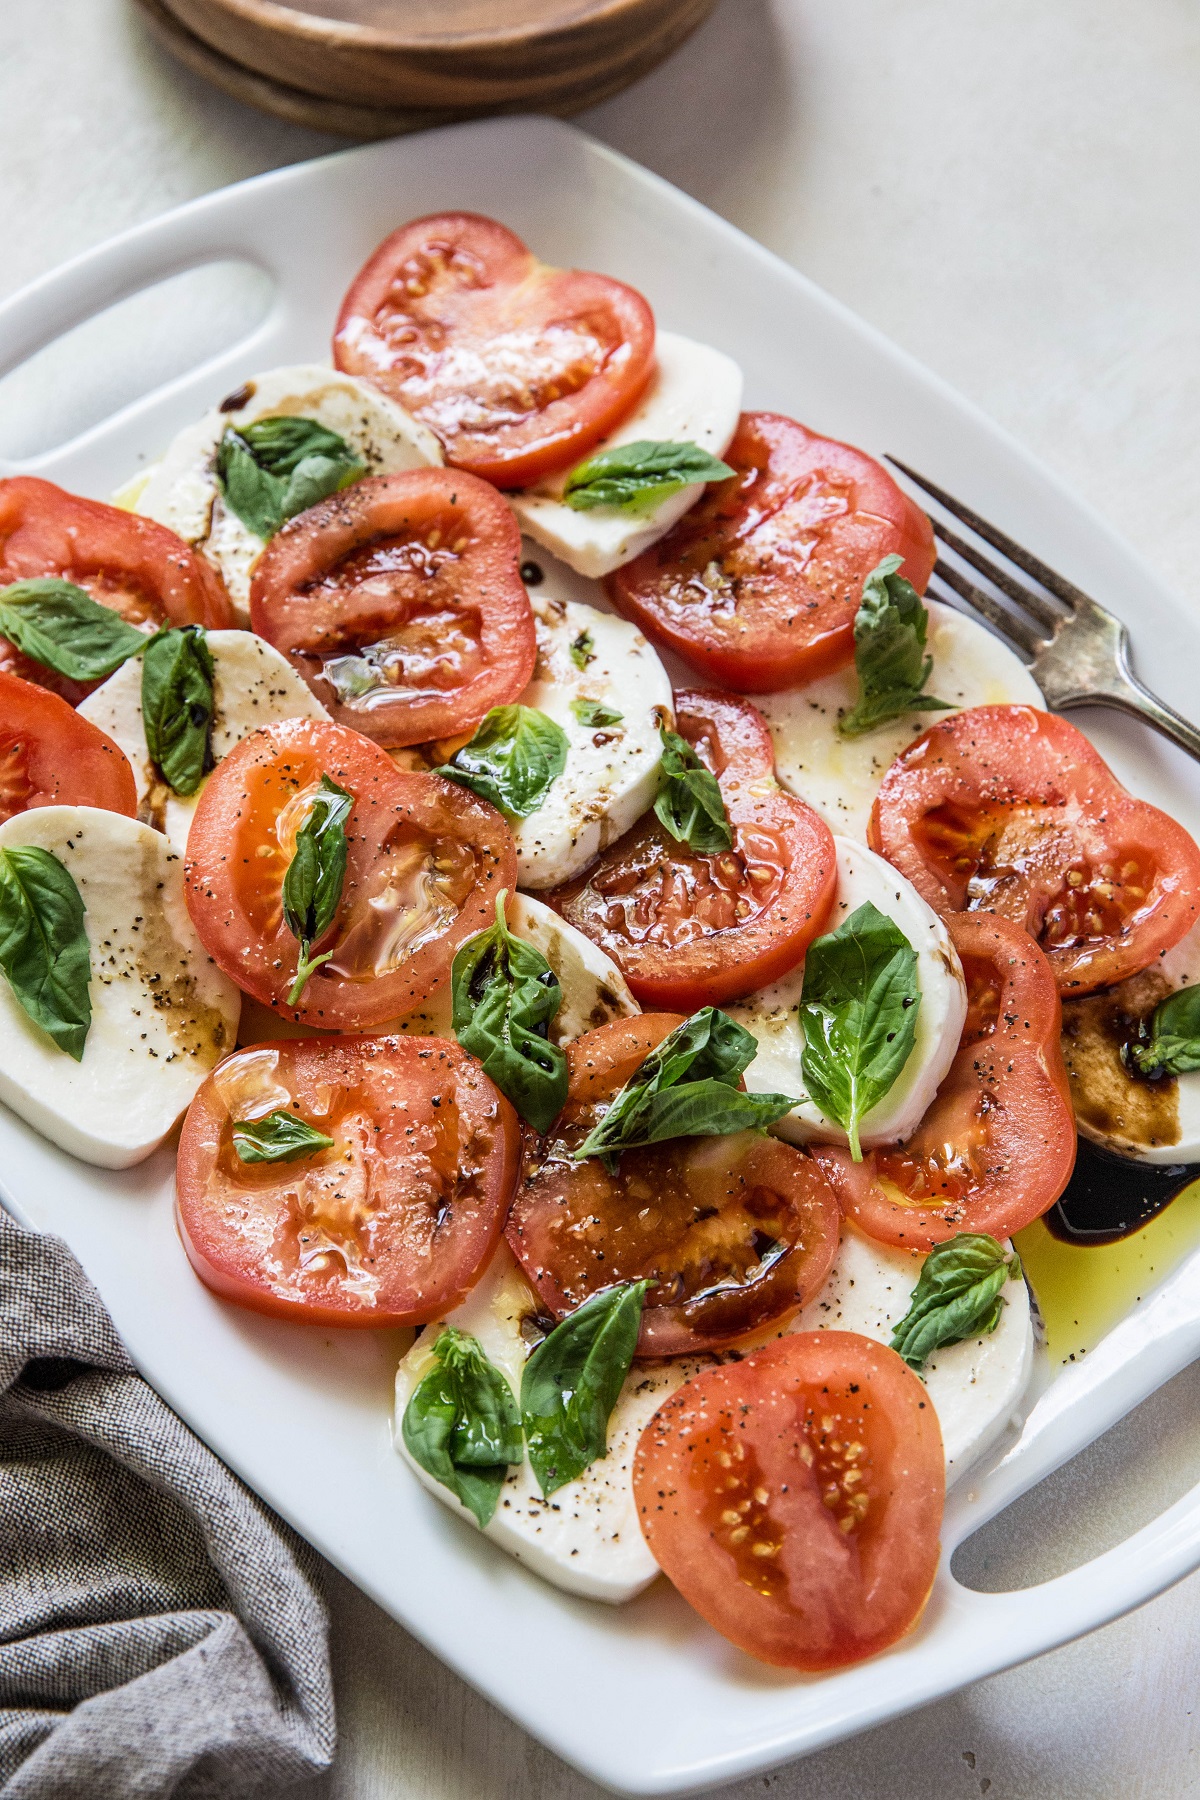 Slices of tomatoes, cheese and basil on a serving plate with oil and vinegar.